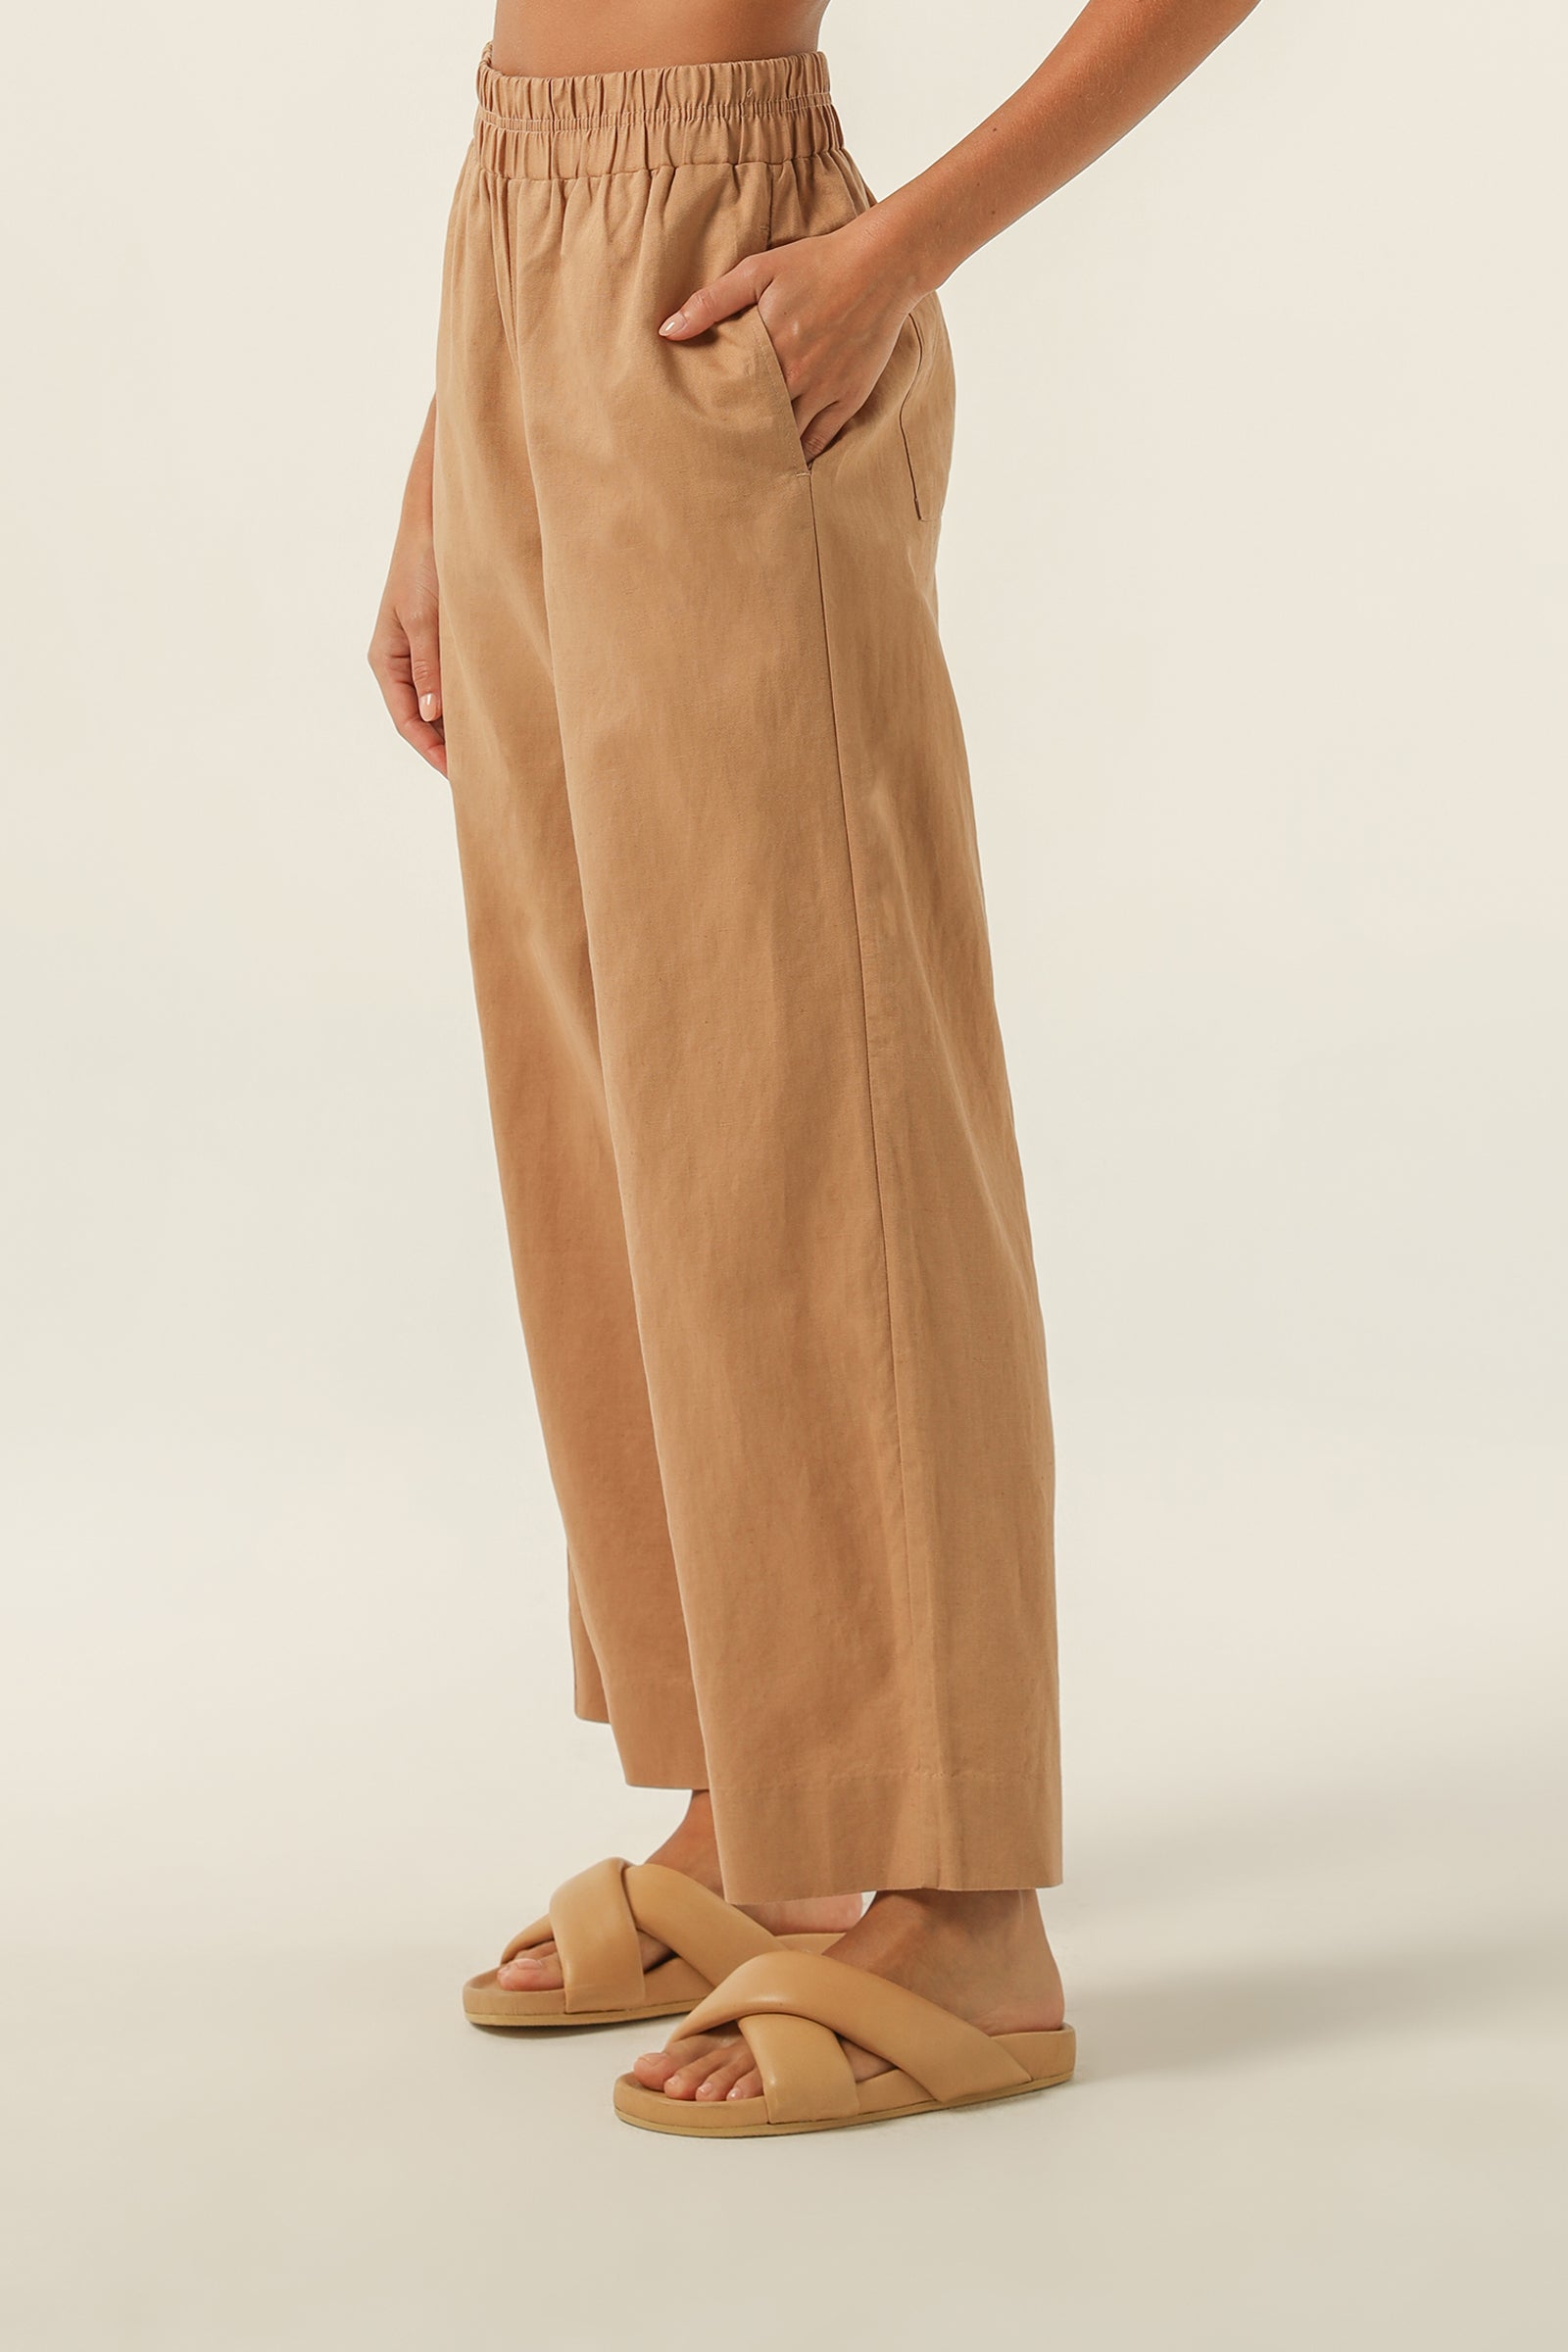 Nude Lucy Preston Linen Pant in a Brown Coffee Colour